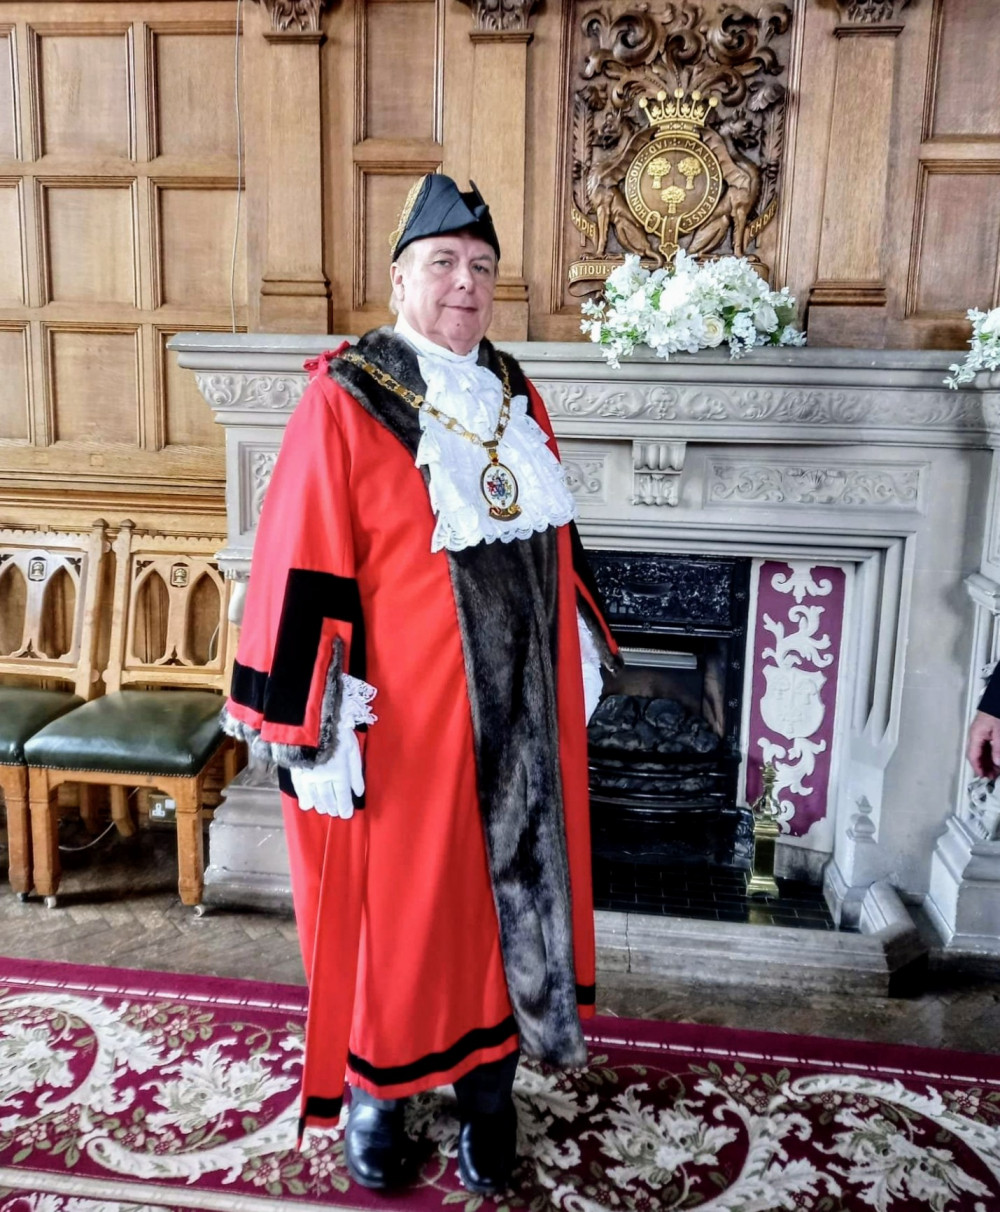 Mayor of Cheshire East Council, Cllr David Marren has spoken to Nub News about his involvement in Crewe's Polish Evening (Cllr David Marren).